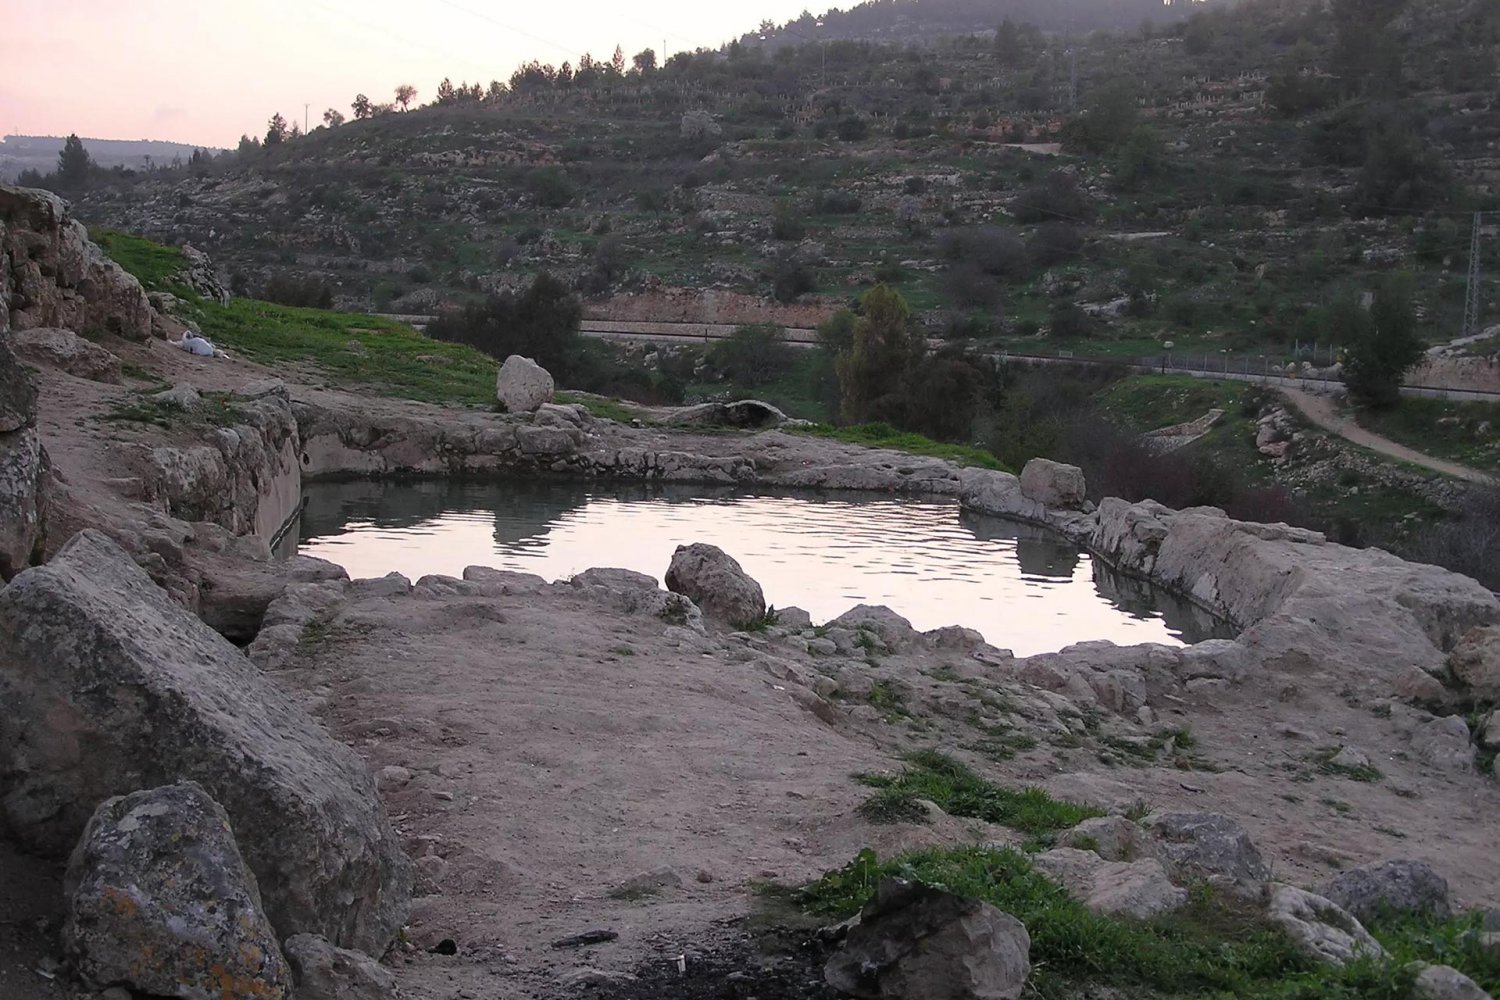 ‘Ayn Hinya spring pool before it was incorporated into the Israeli national park and made inaccessible to al-Walaja villagers